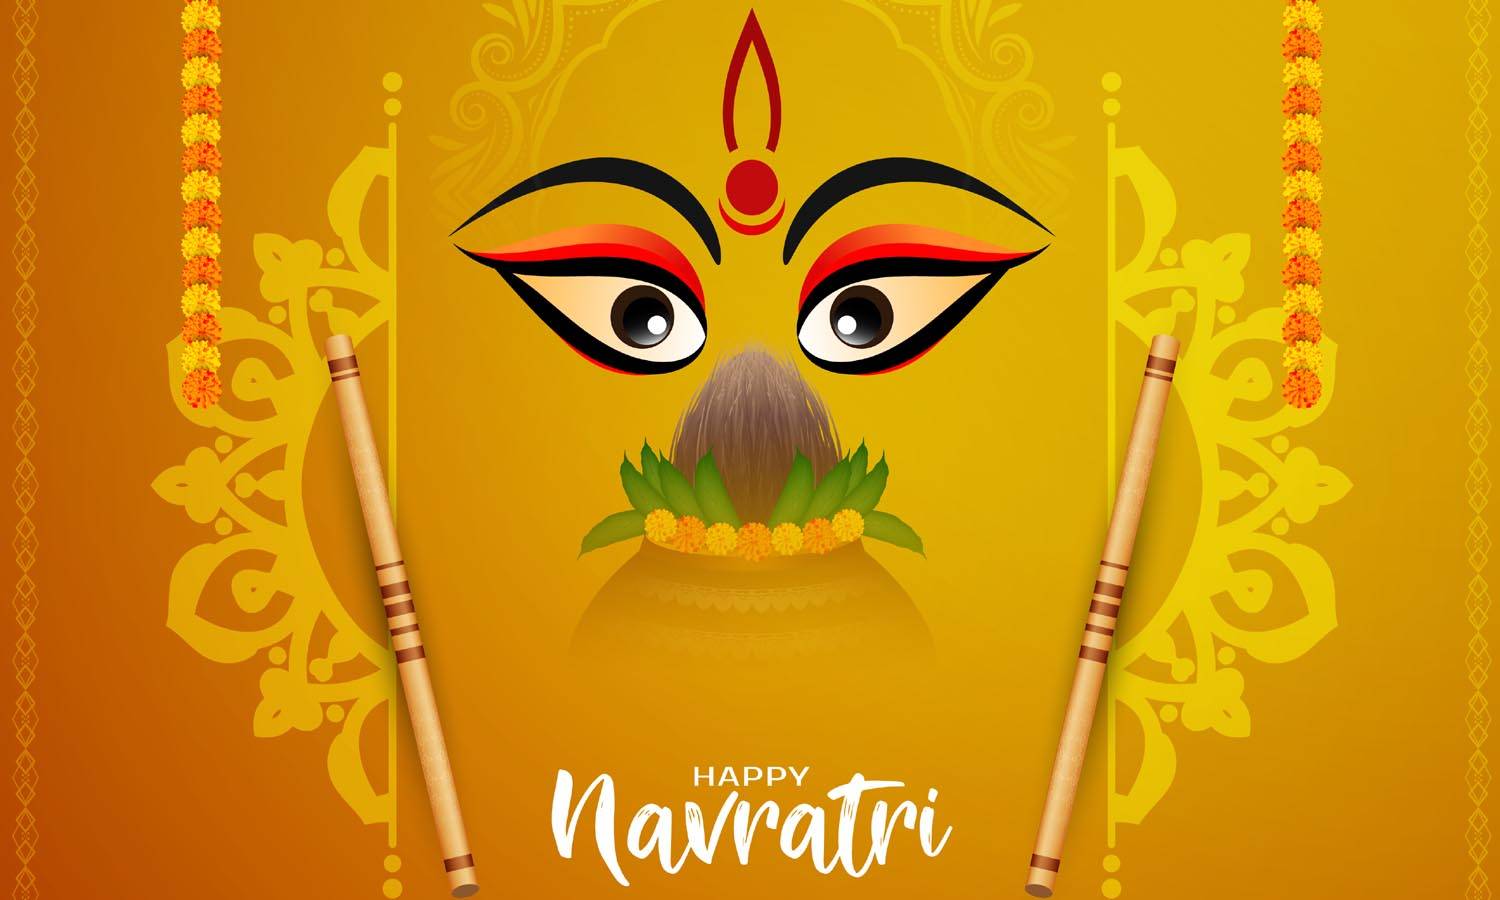 Happy Navratri Wishes Messages in Hindi